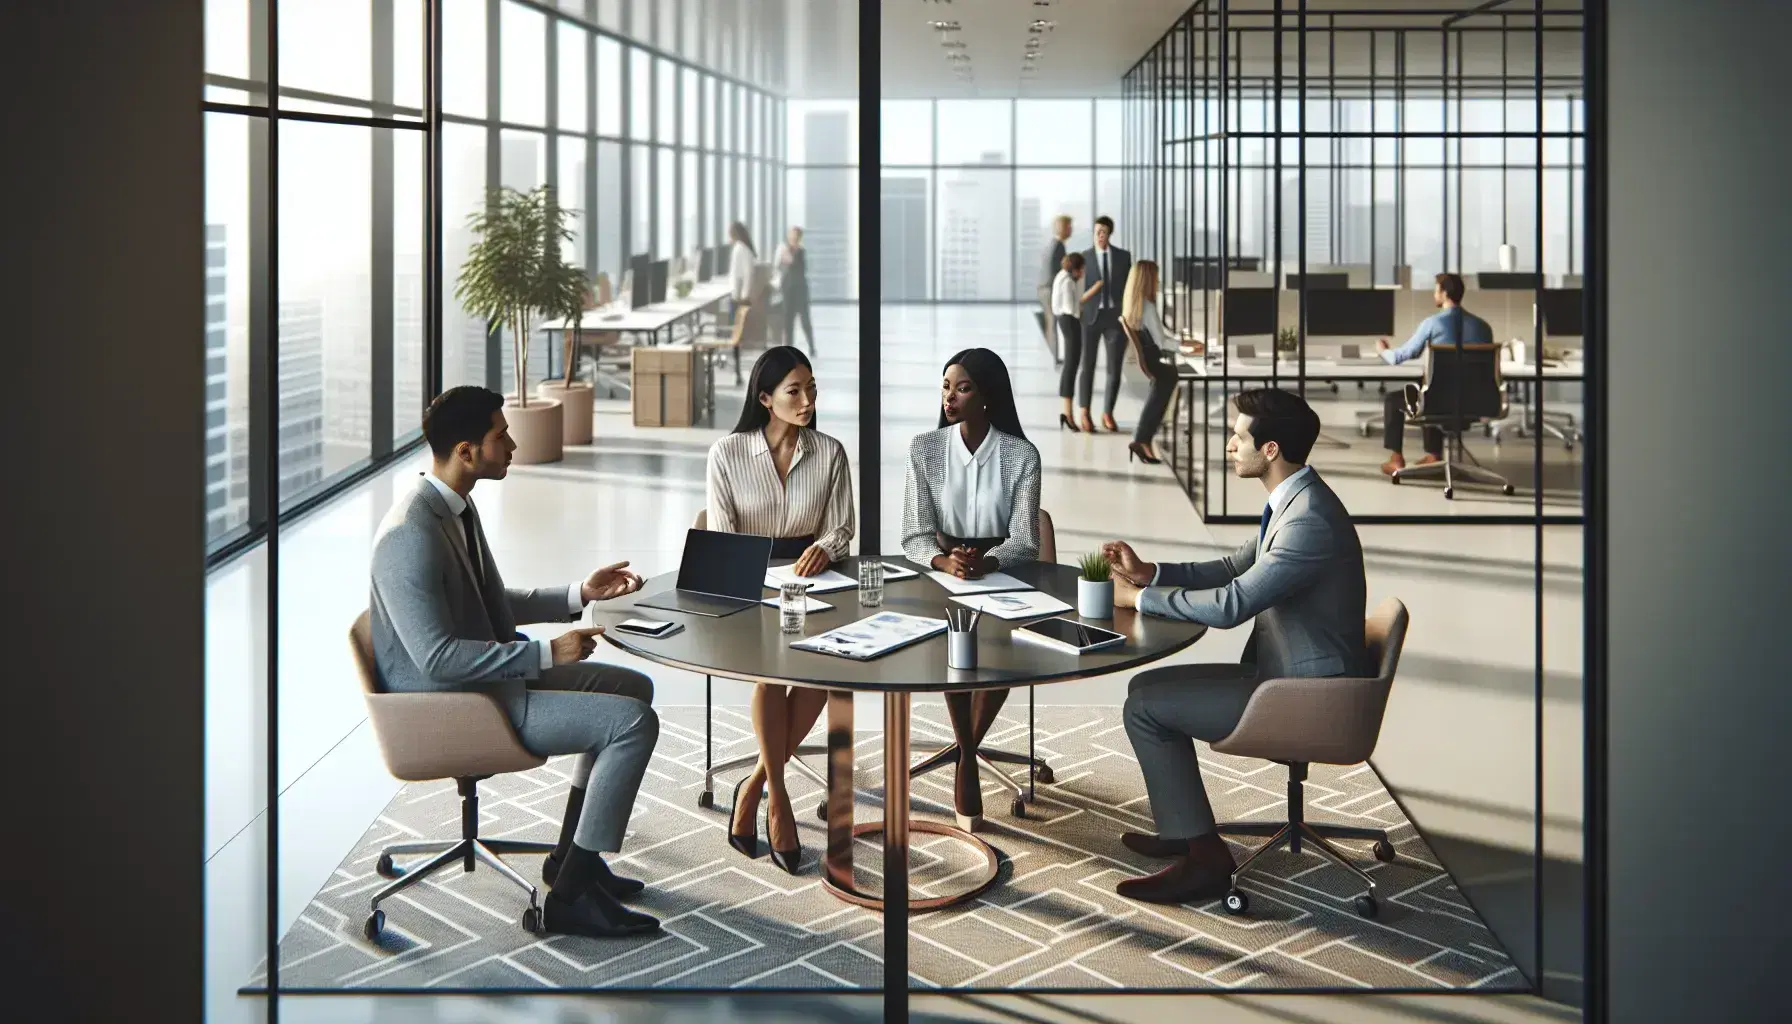 Diverse team of professionals in a meeting at a round table with tech devices in a modern, well-lit office with glass partitions and plants.